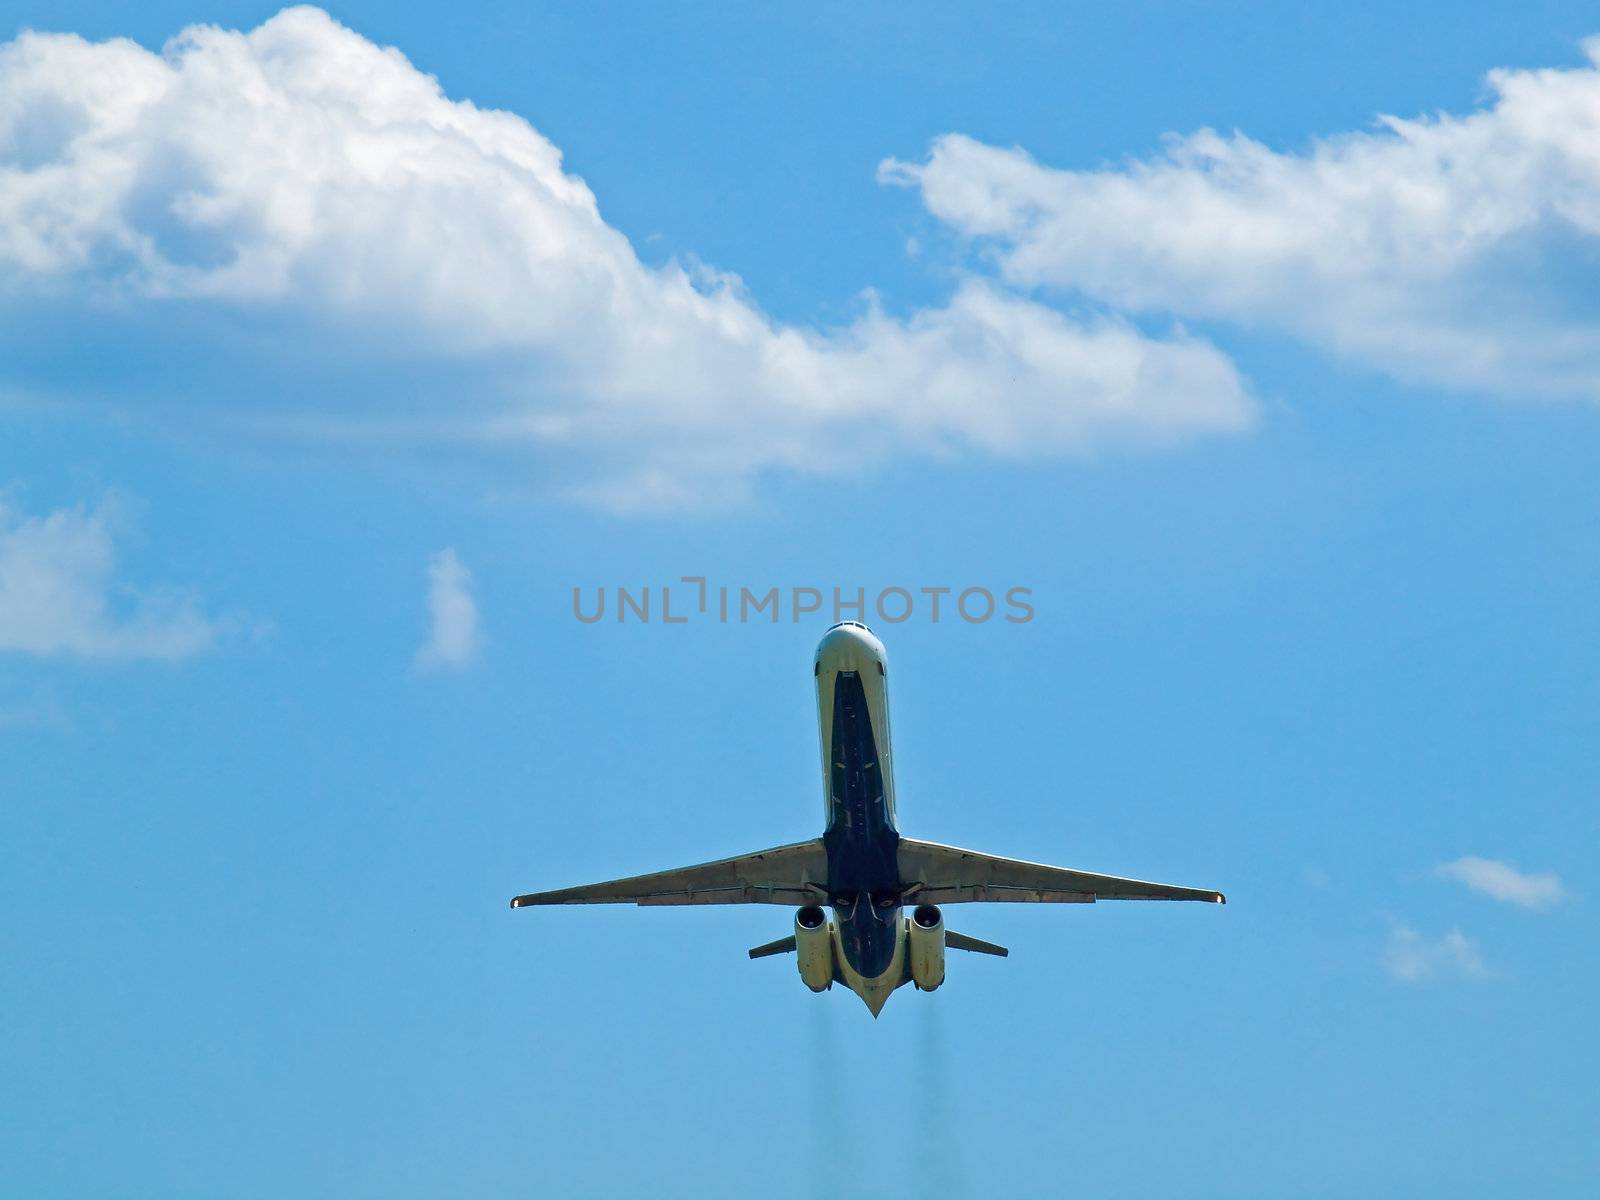 A Commercial Airliner Taking Off into a Partly Cloudy Blue Sky by Frankljunior